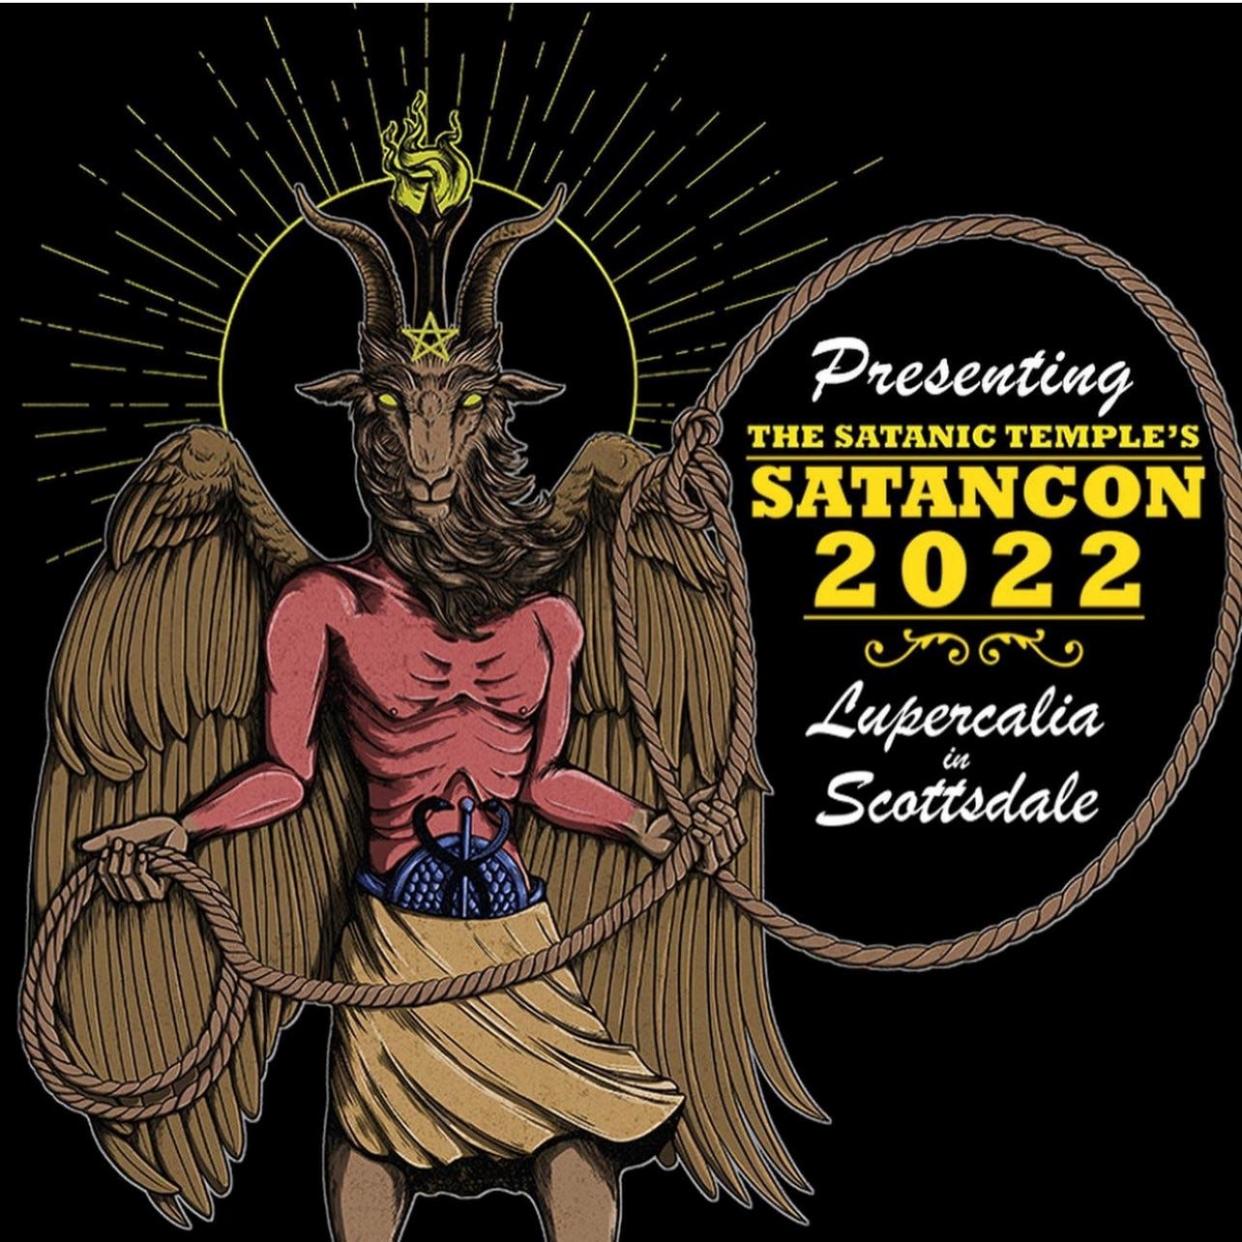 The Satanic Temple is holding its inaugural convention in Scottsdale this weekend.